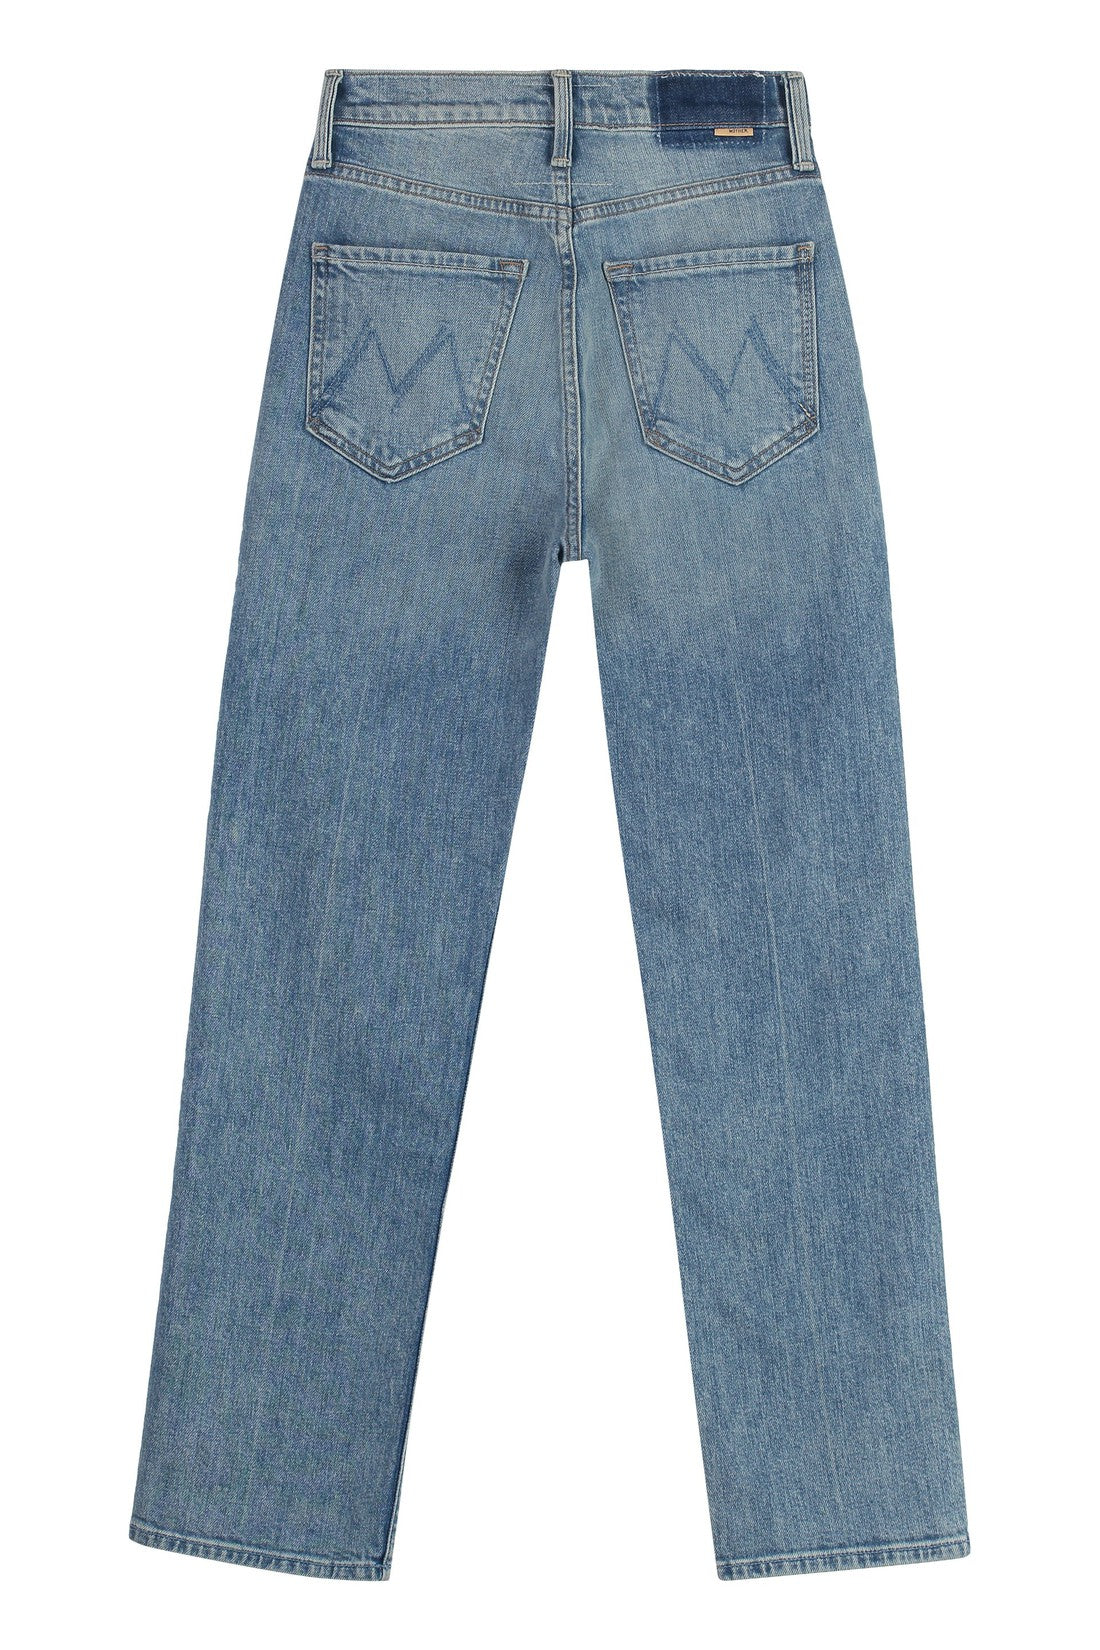 Mother-OUTLET-SALE-Rider Ankle Skinny jeans-ARCHIVIST